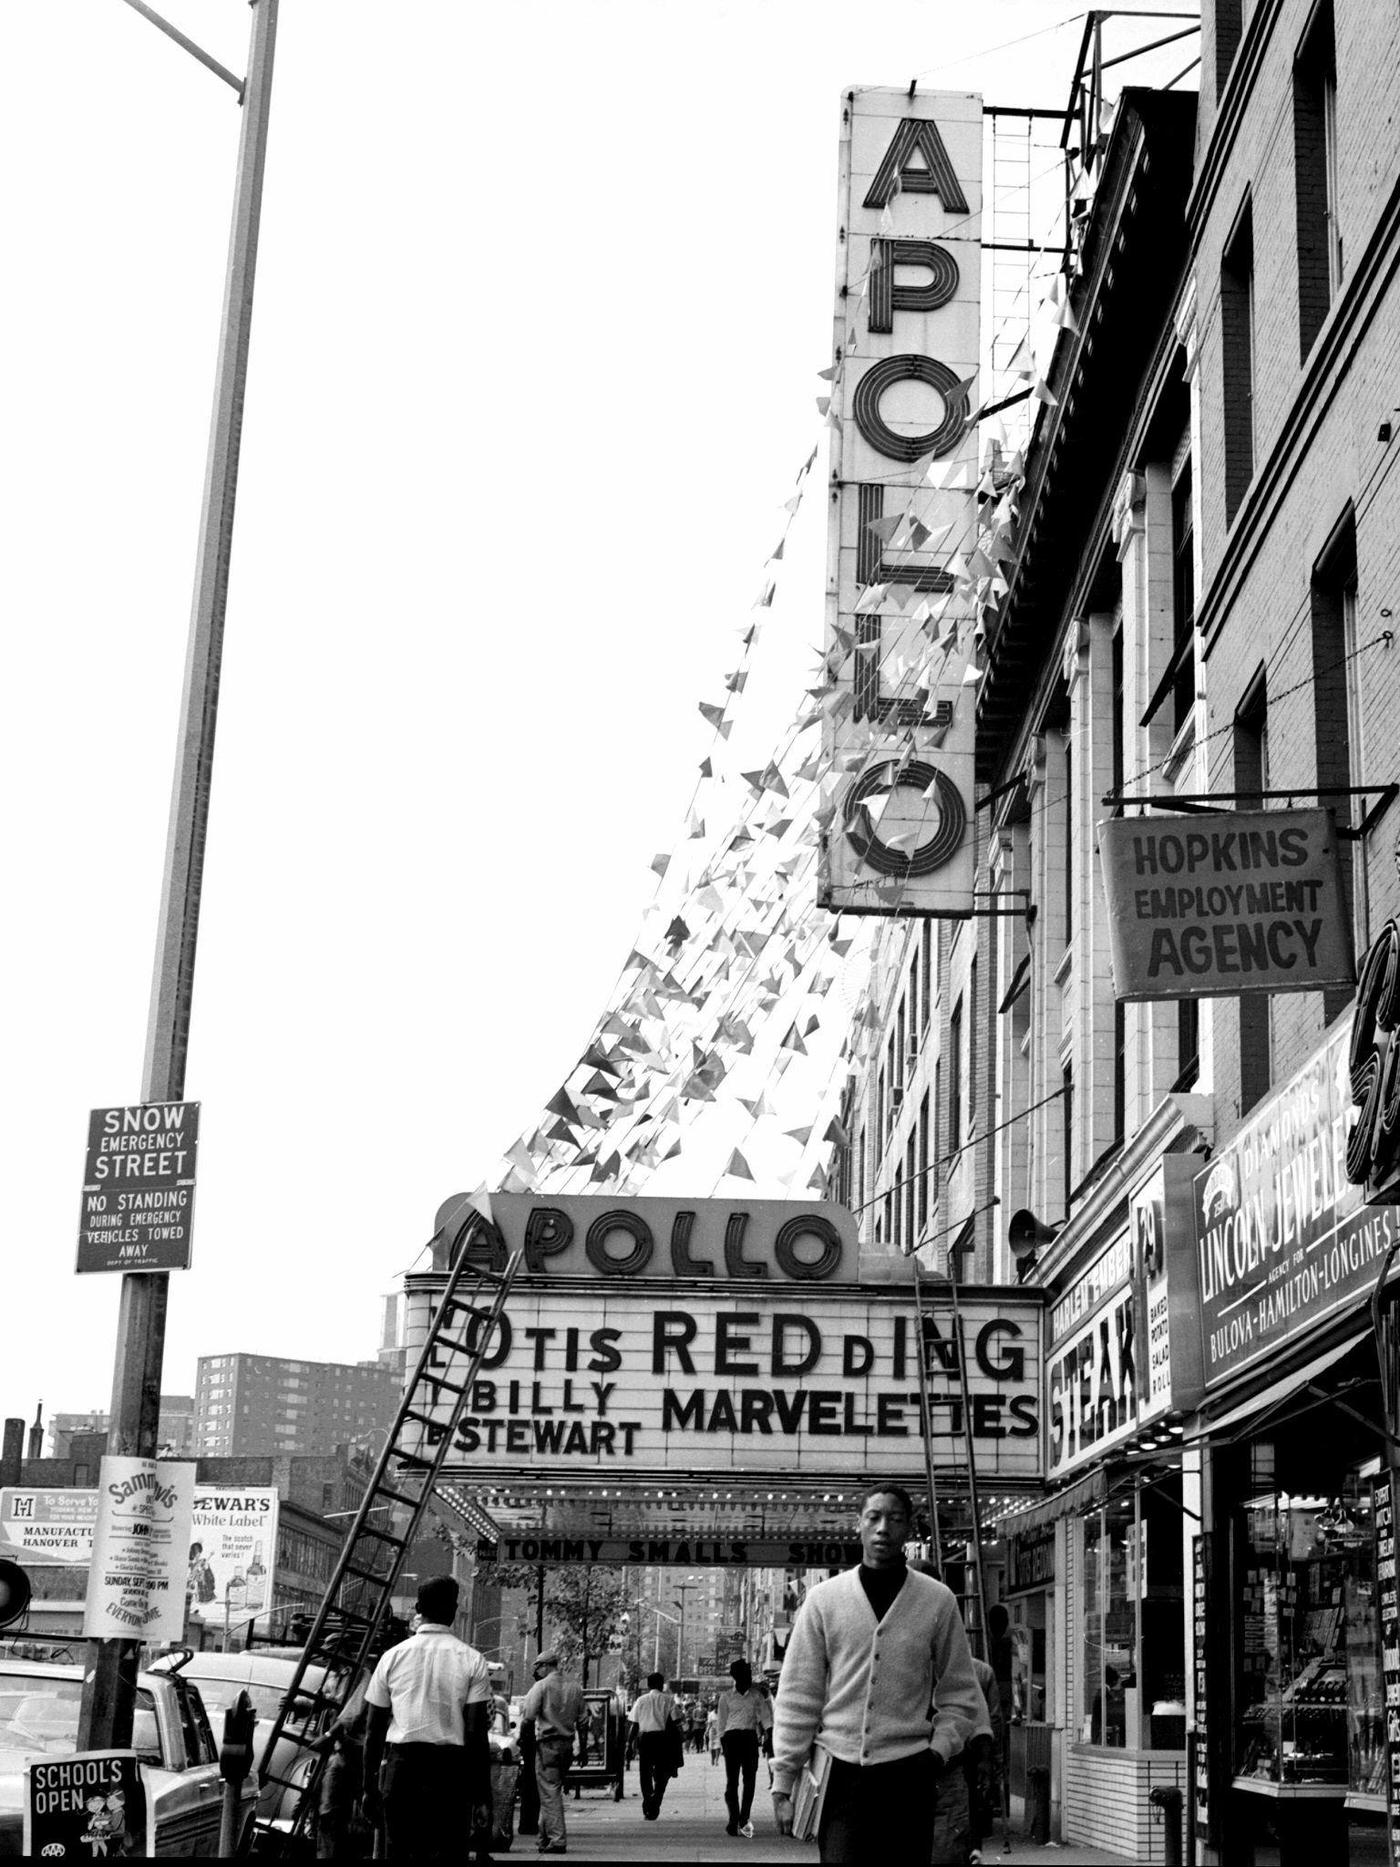 The Apollo Theater In Harlem With Otis Redding, Billy Stewart And The Marvelettes On The Marquee, Manhattan, 1967